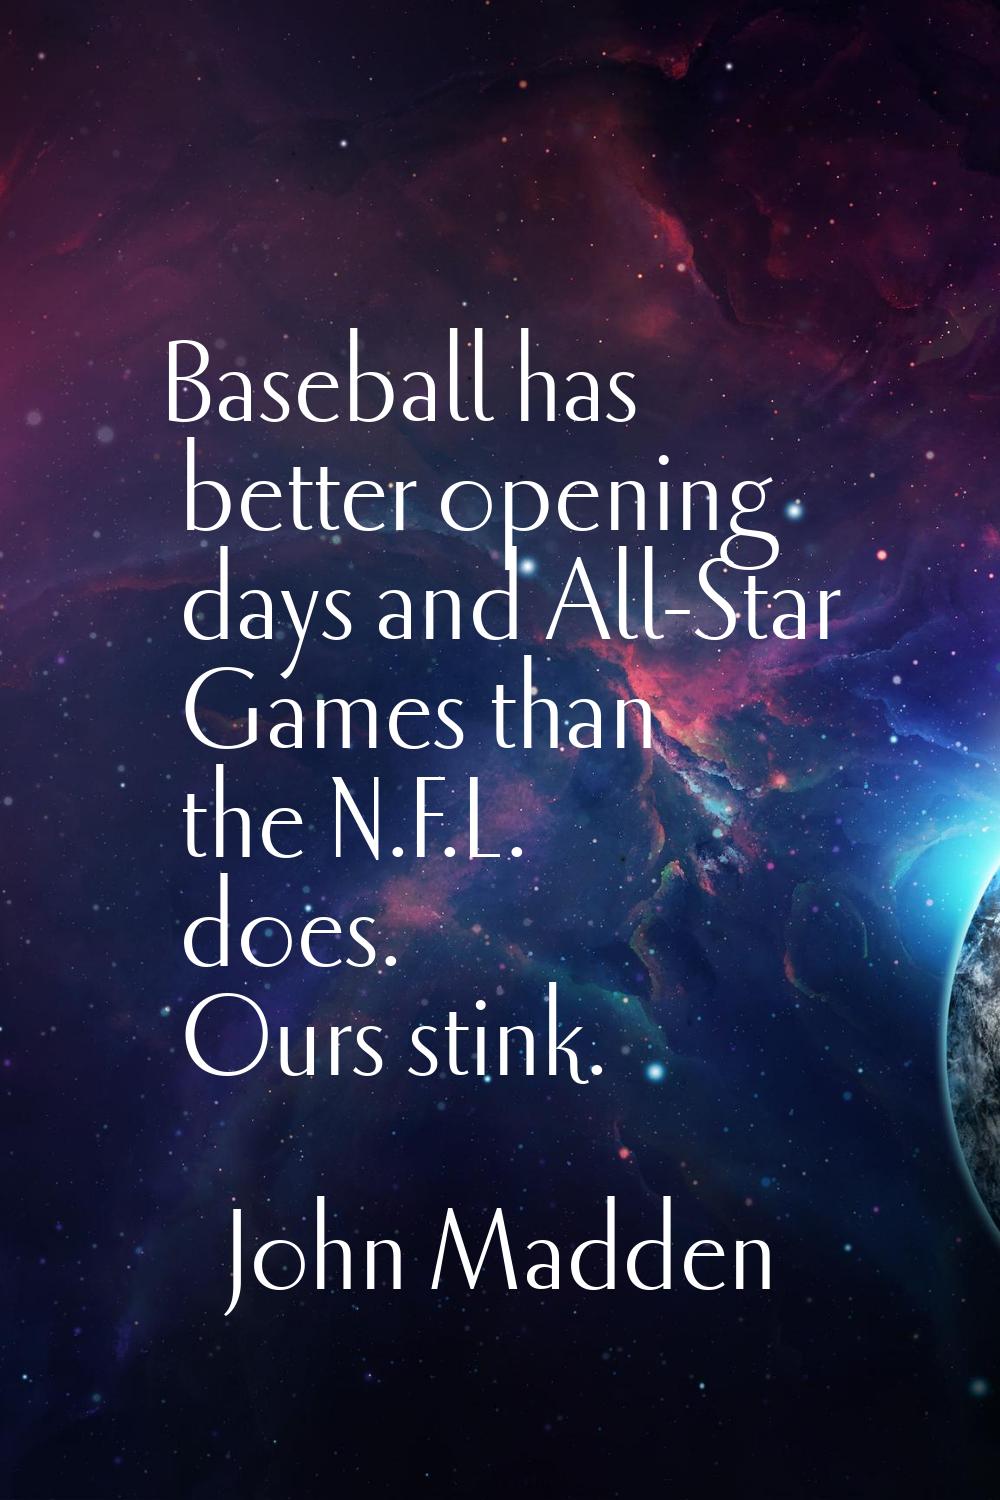 Baseball has better opening days and All-Star Games than the N.F.L. does. Ours stink.